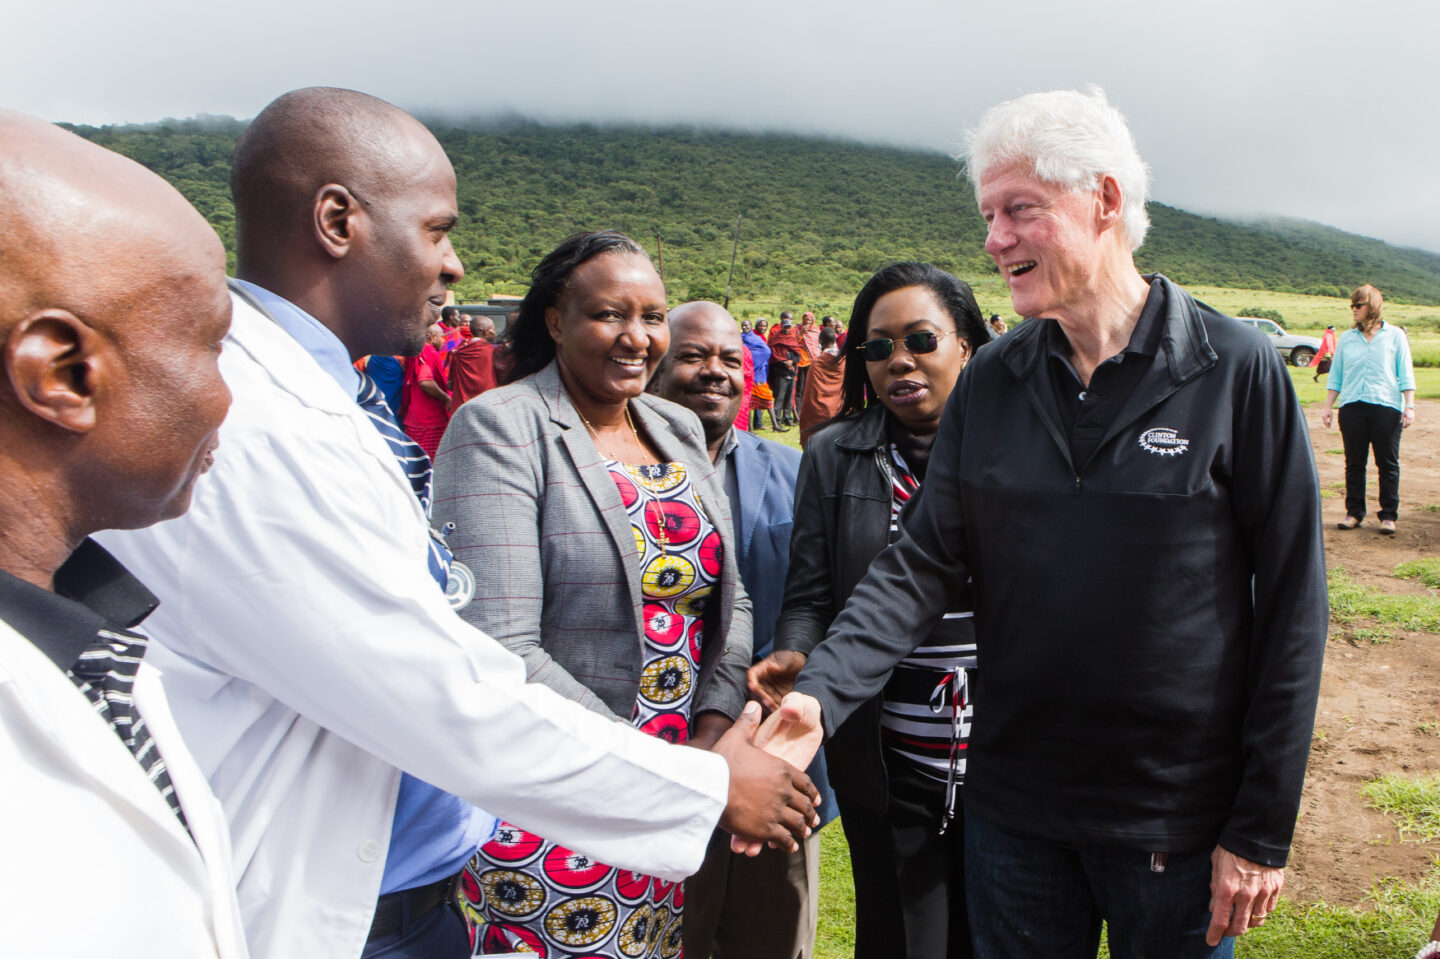 President Clinton shakes hands with medical professionals in Ngorongoro, Tanzania